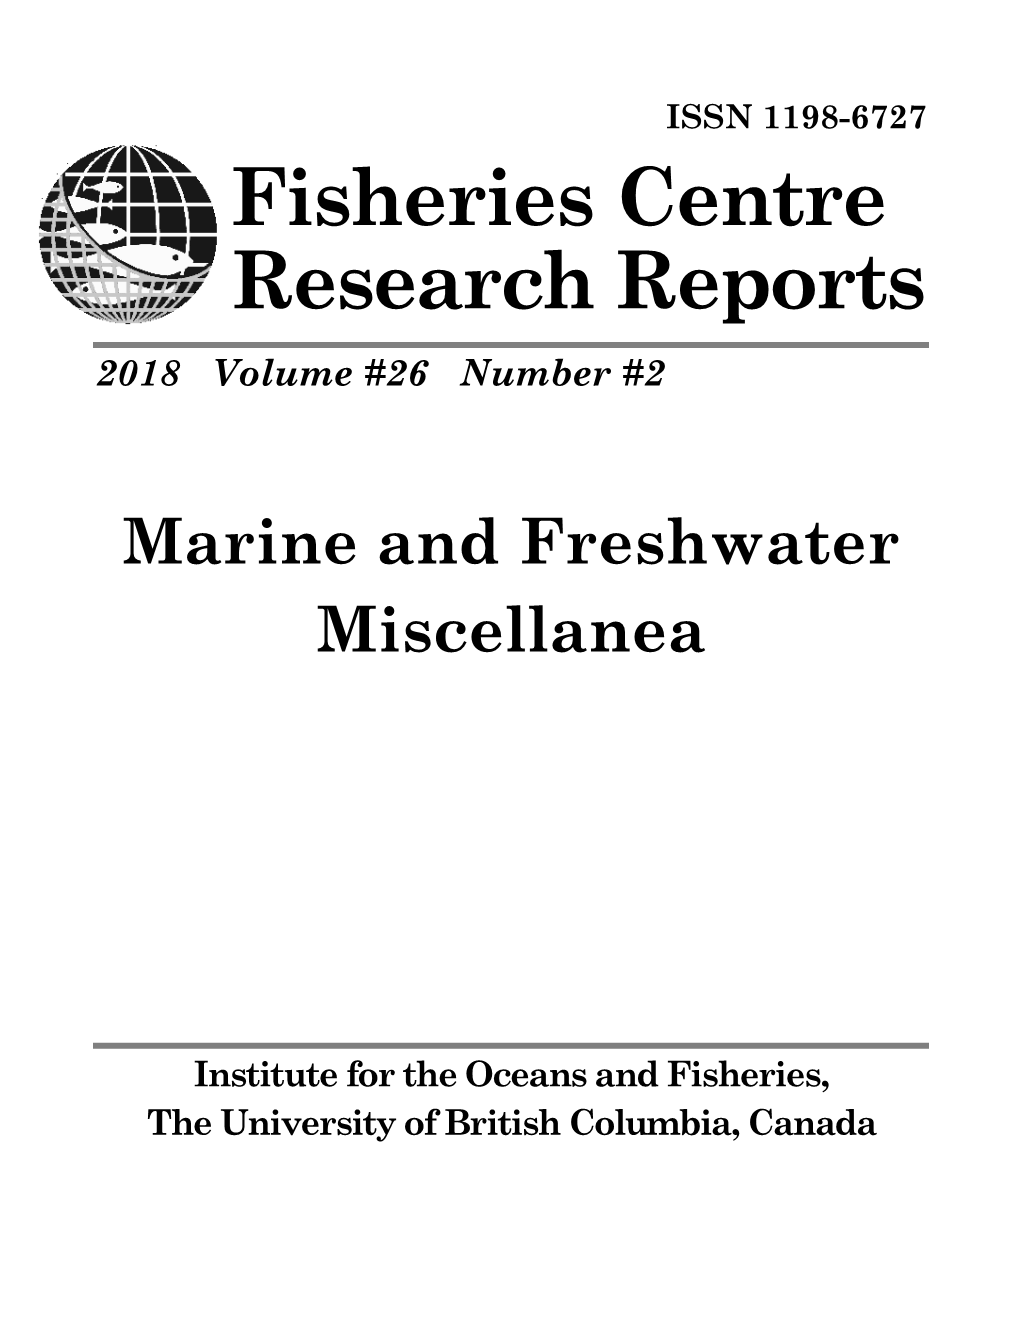 Fisheries Centre Research Reports 2018 Volume #26 Number #2